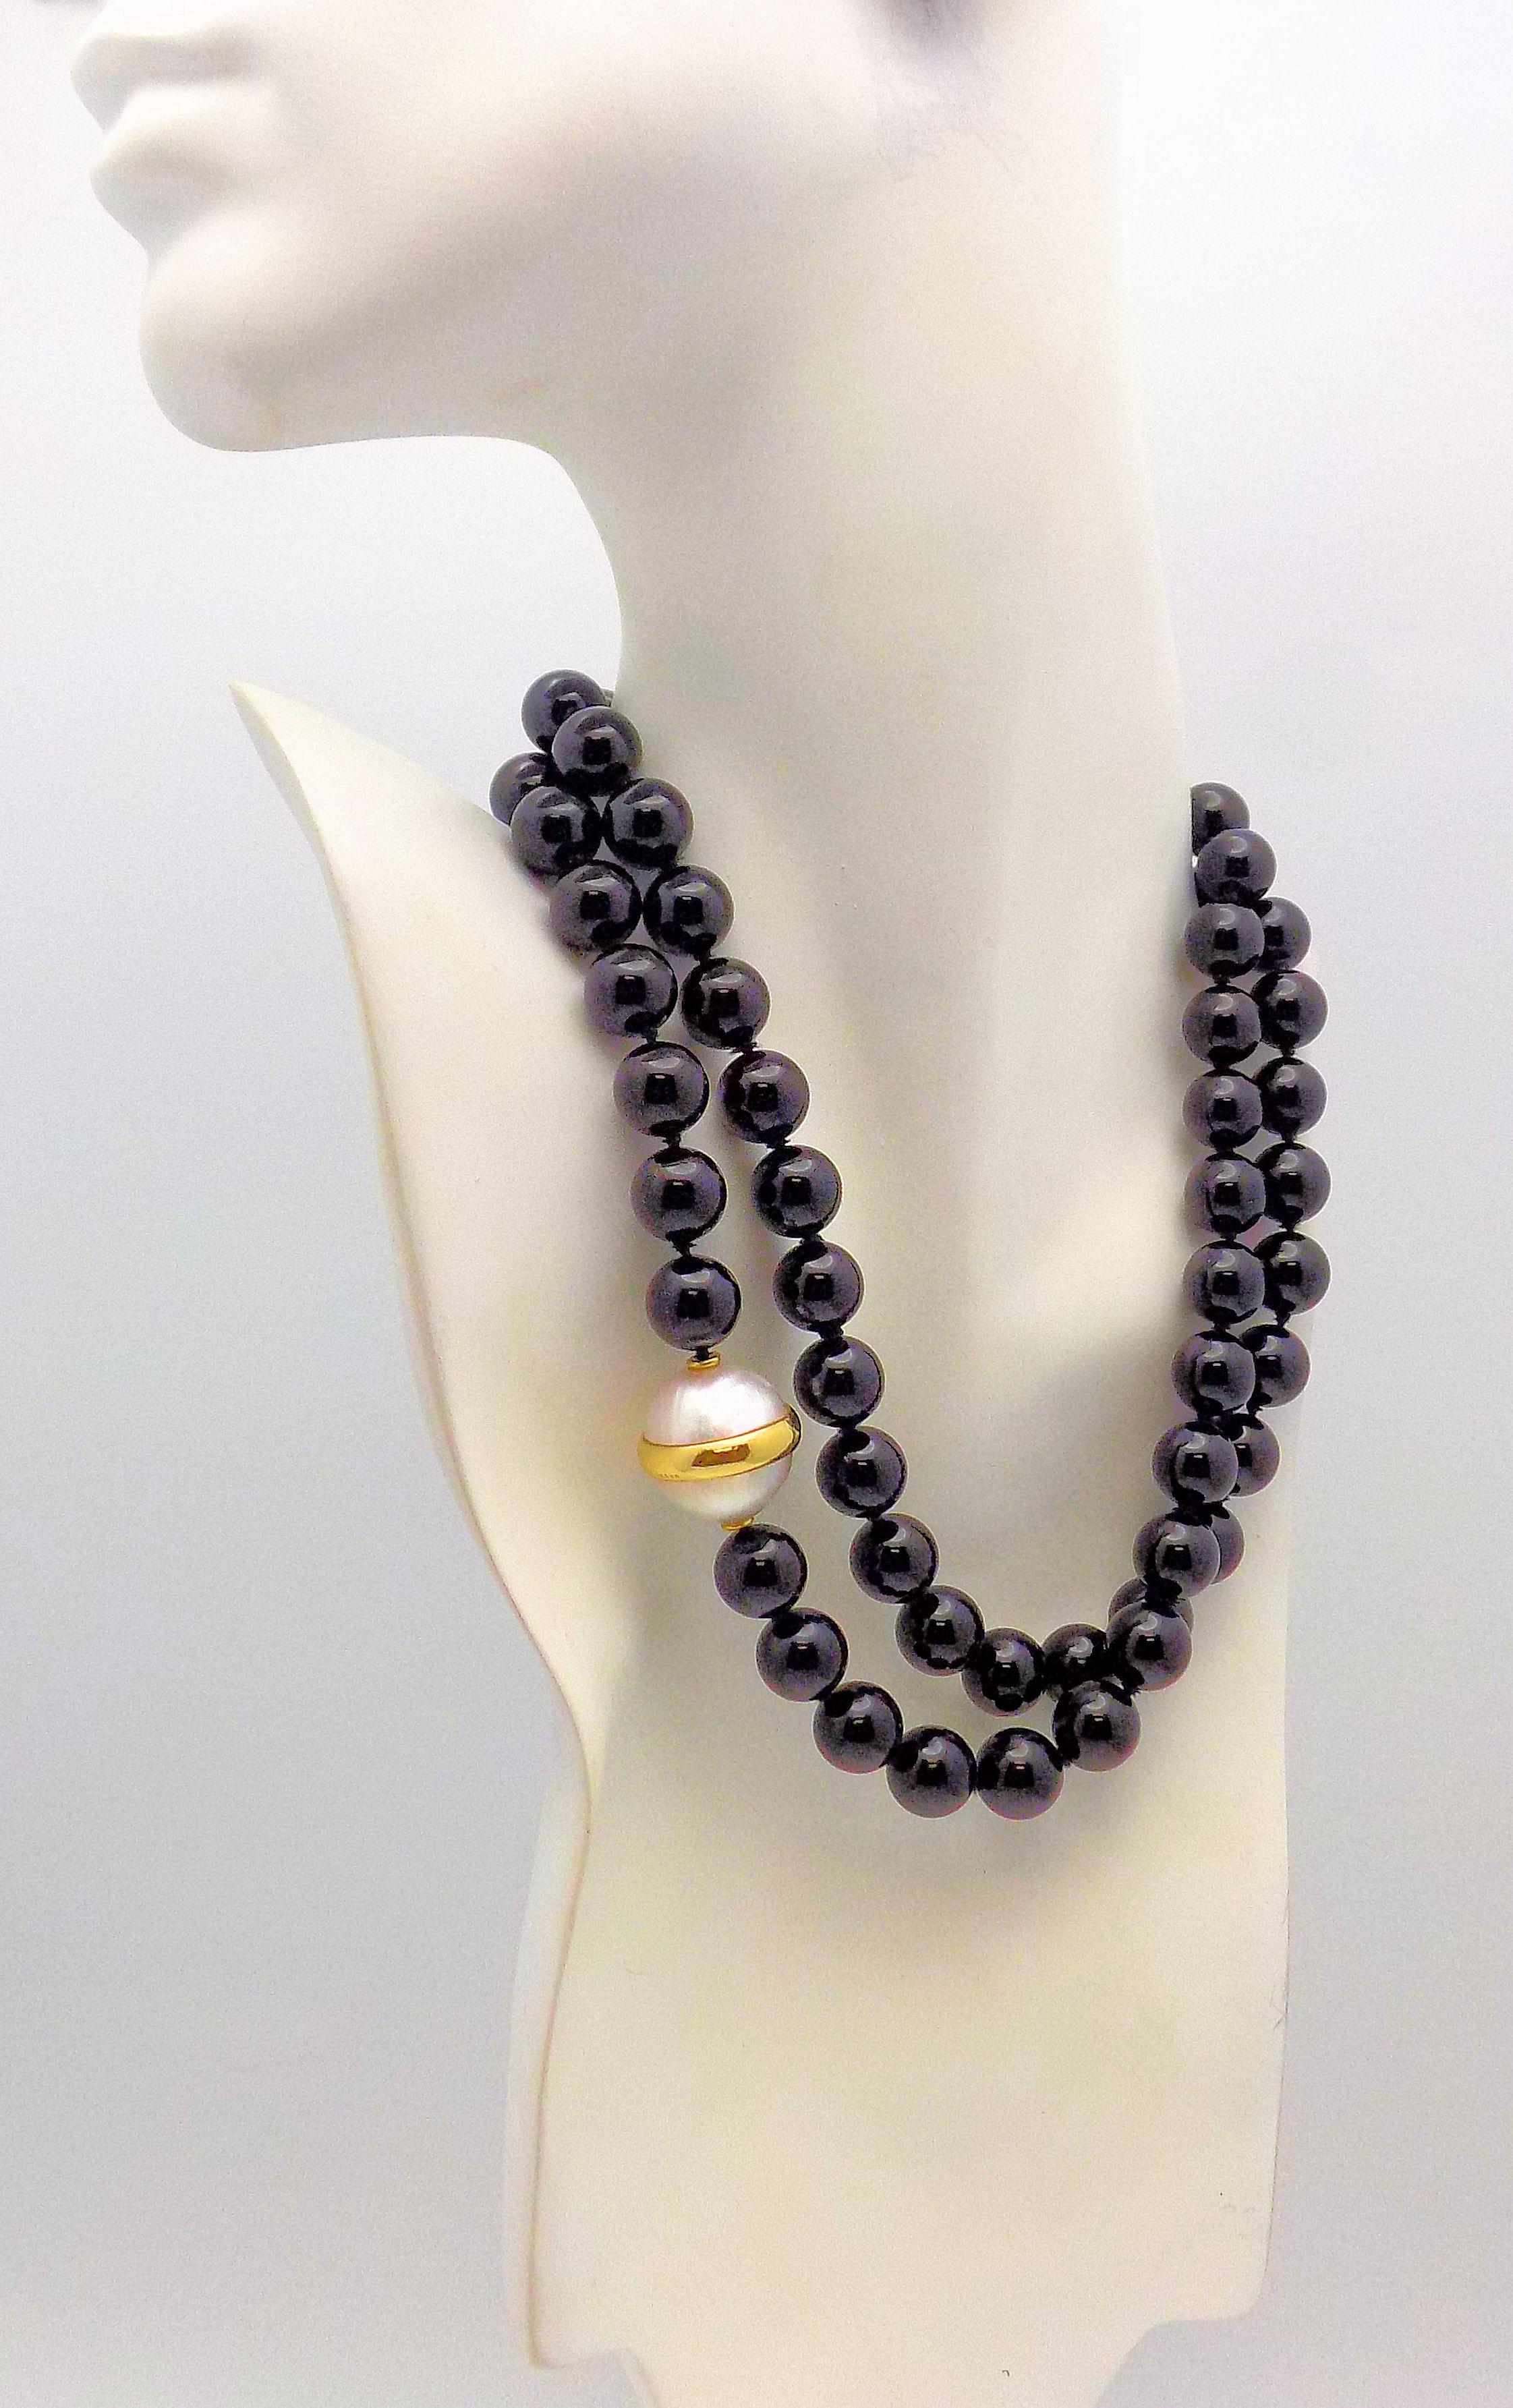 Classic 33 inch Black Onyx Bead Necklace, each bead measures 12mm, accented by 18 Karat Yellow Gold Trimmed Double Mabé Pearl measuring 18mm; Signed: Tiffany & Co Paloma Picasso 1981.